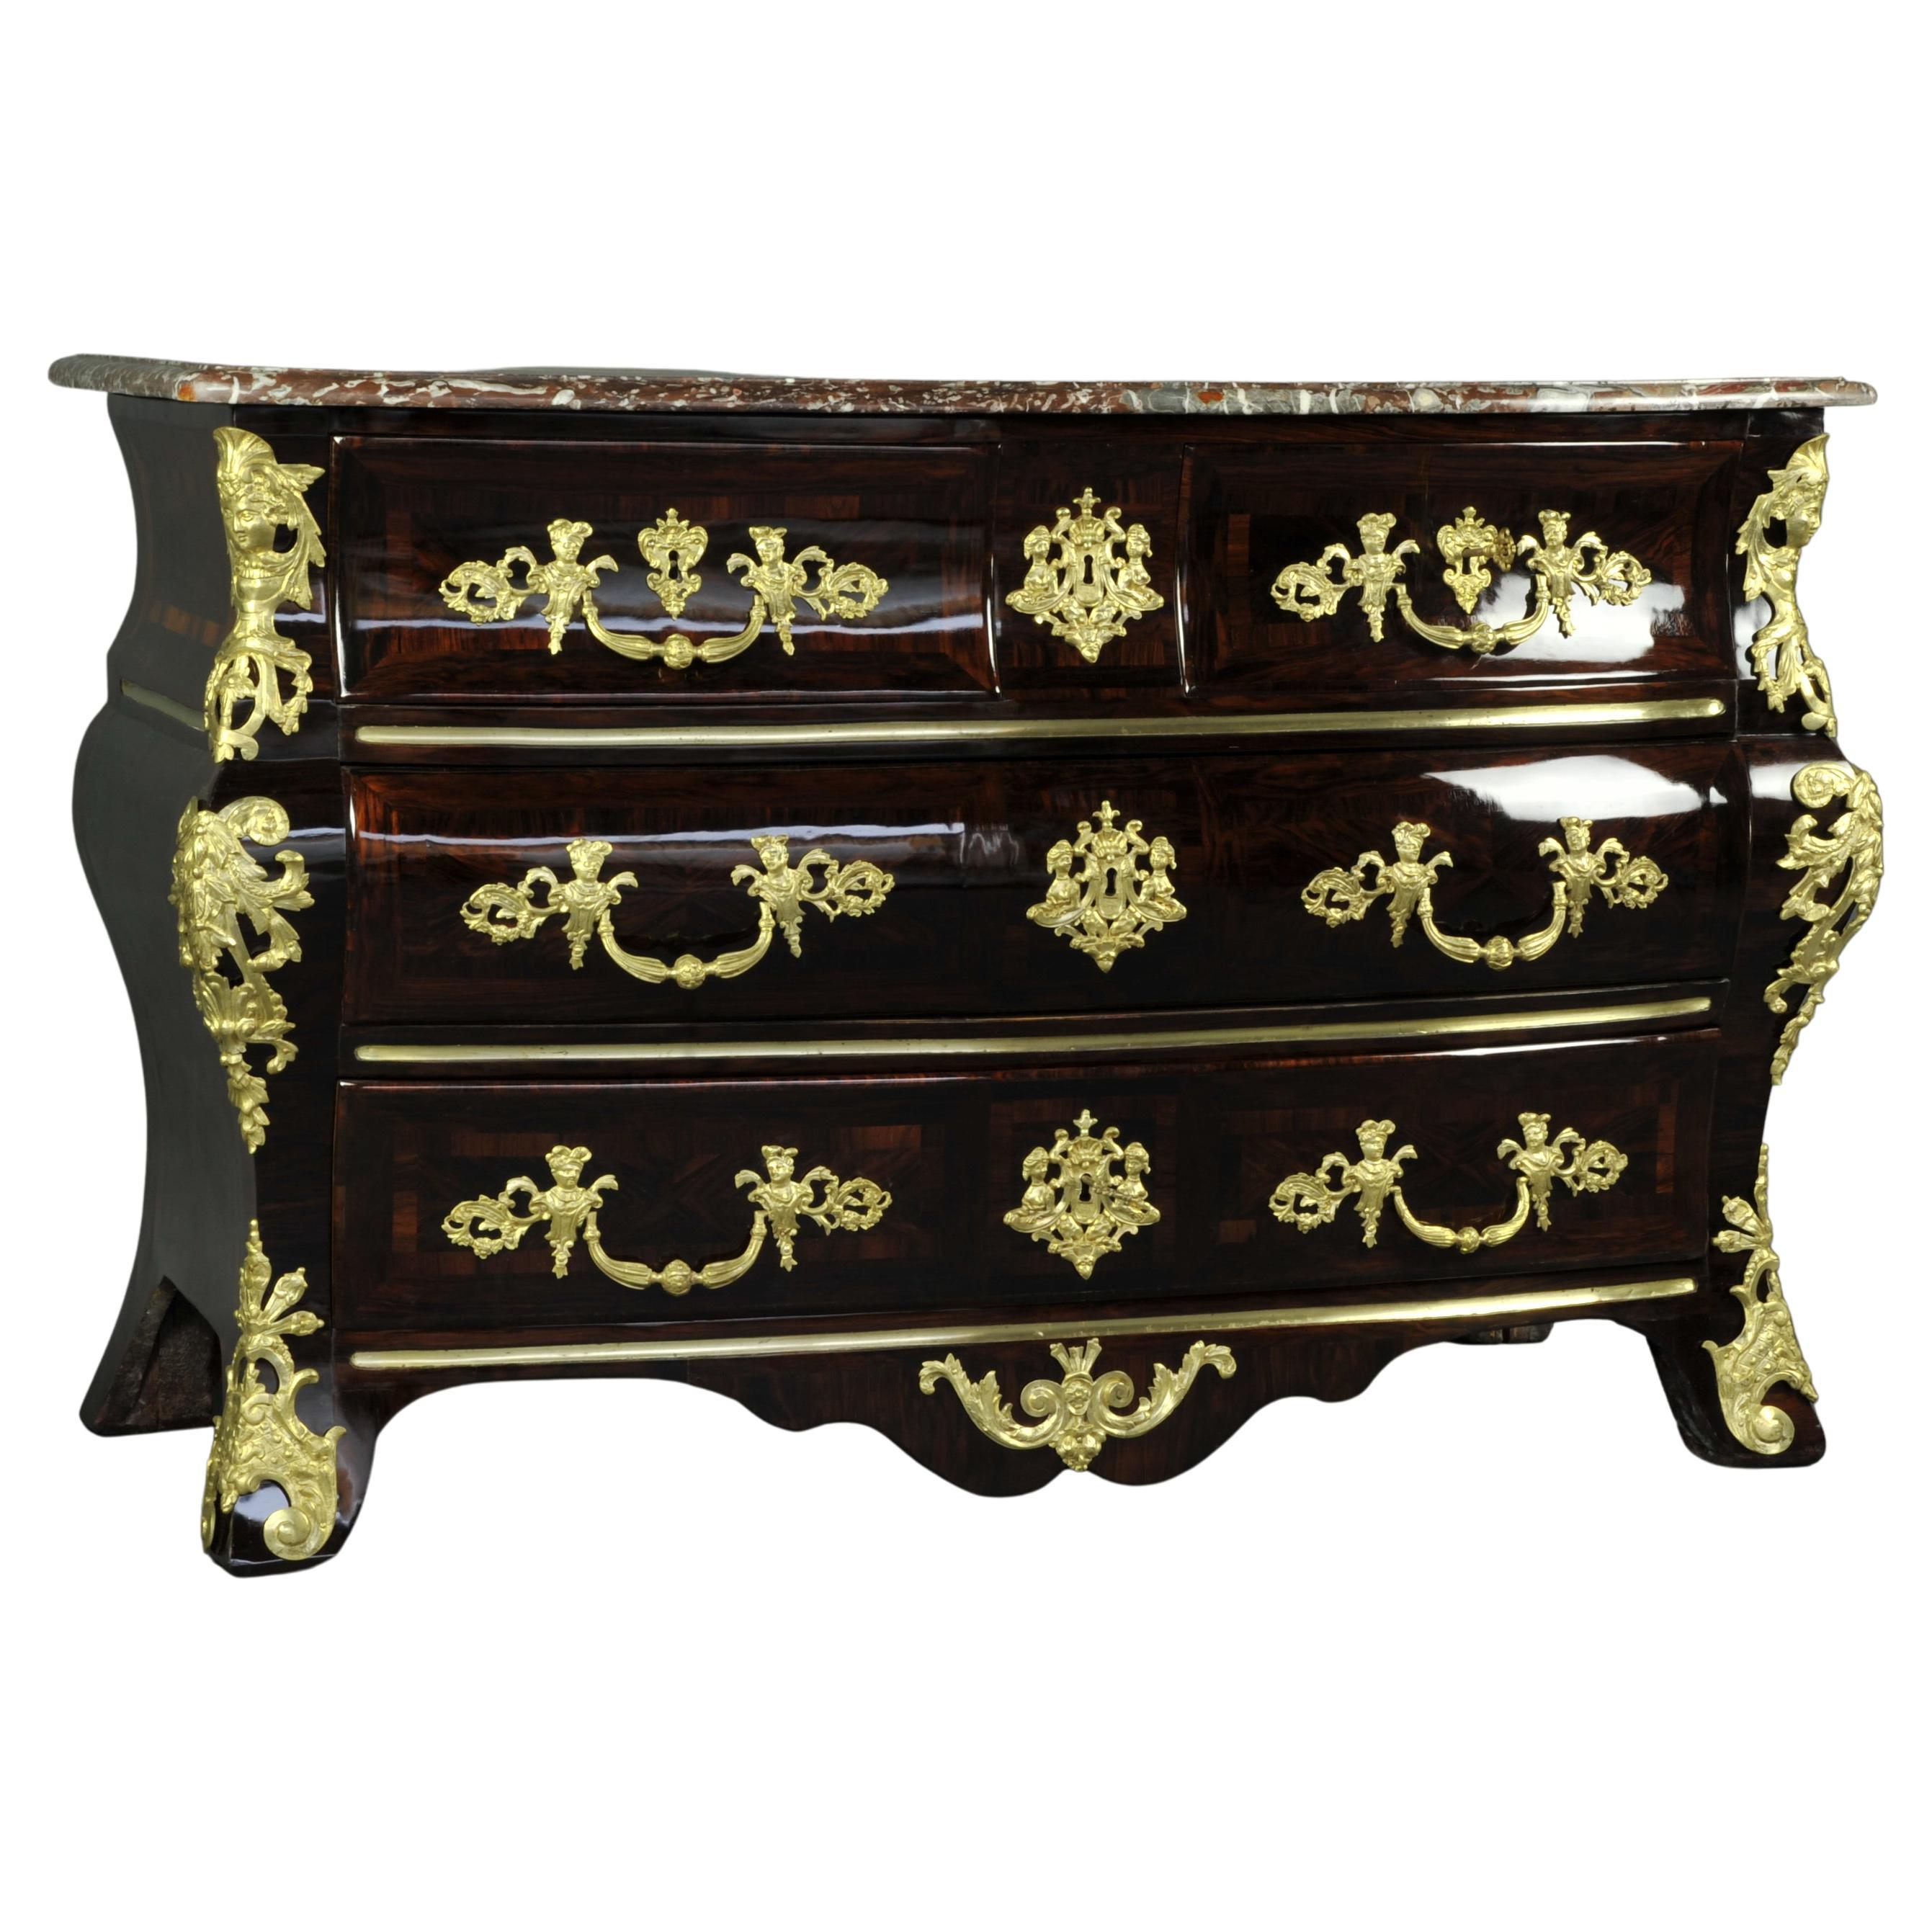 Important Regency Period Tombeau Commode Stamped Jean-Mathieu Chevallier  For Sale